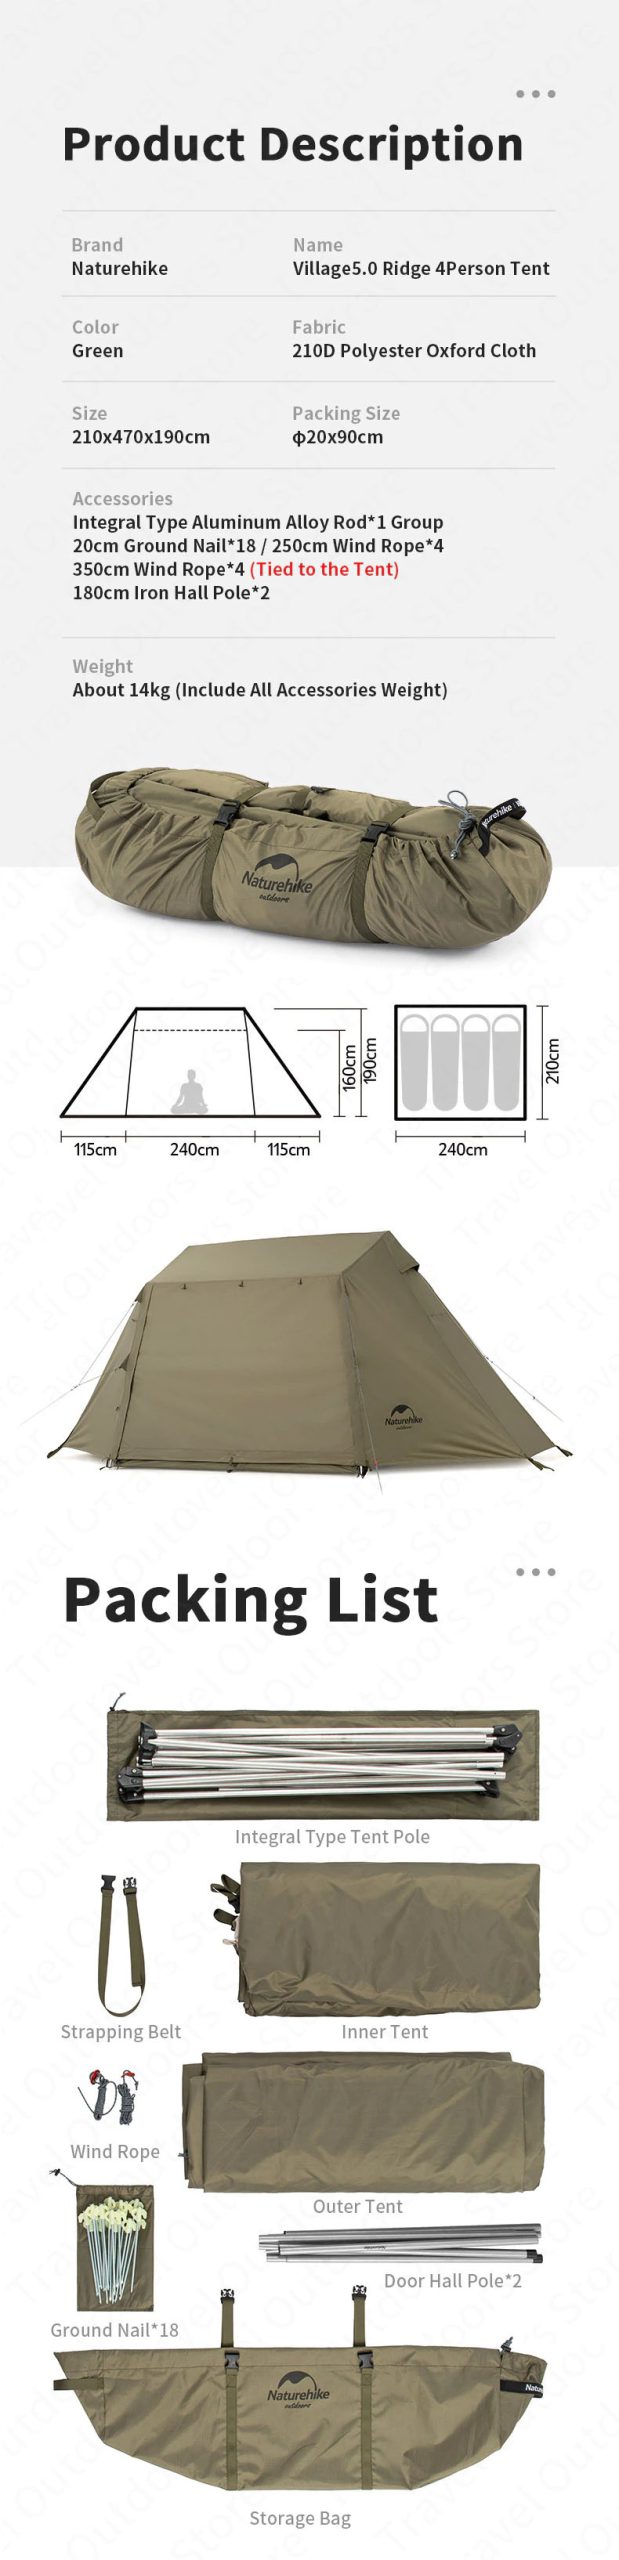 naturehike village 5 tent for 3 4 person army green nh21zp009 09